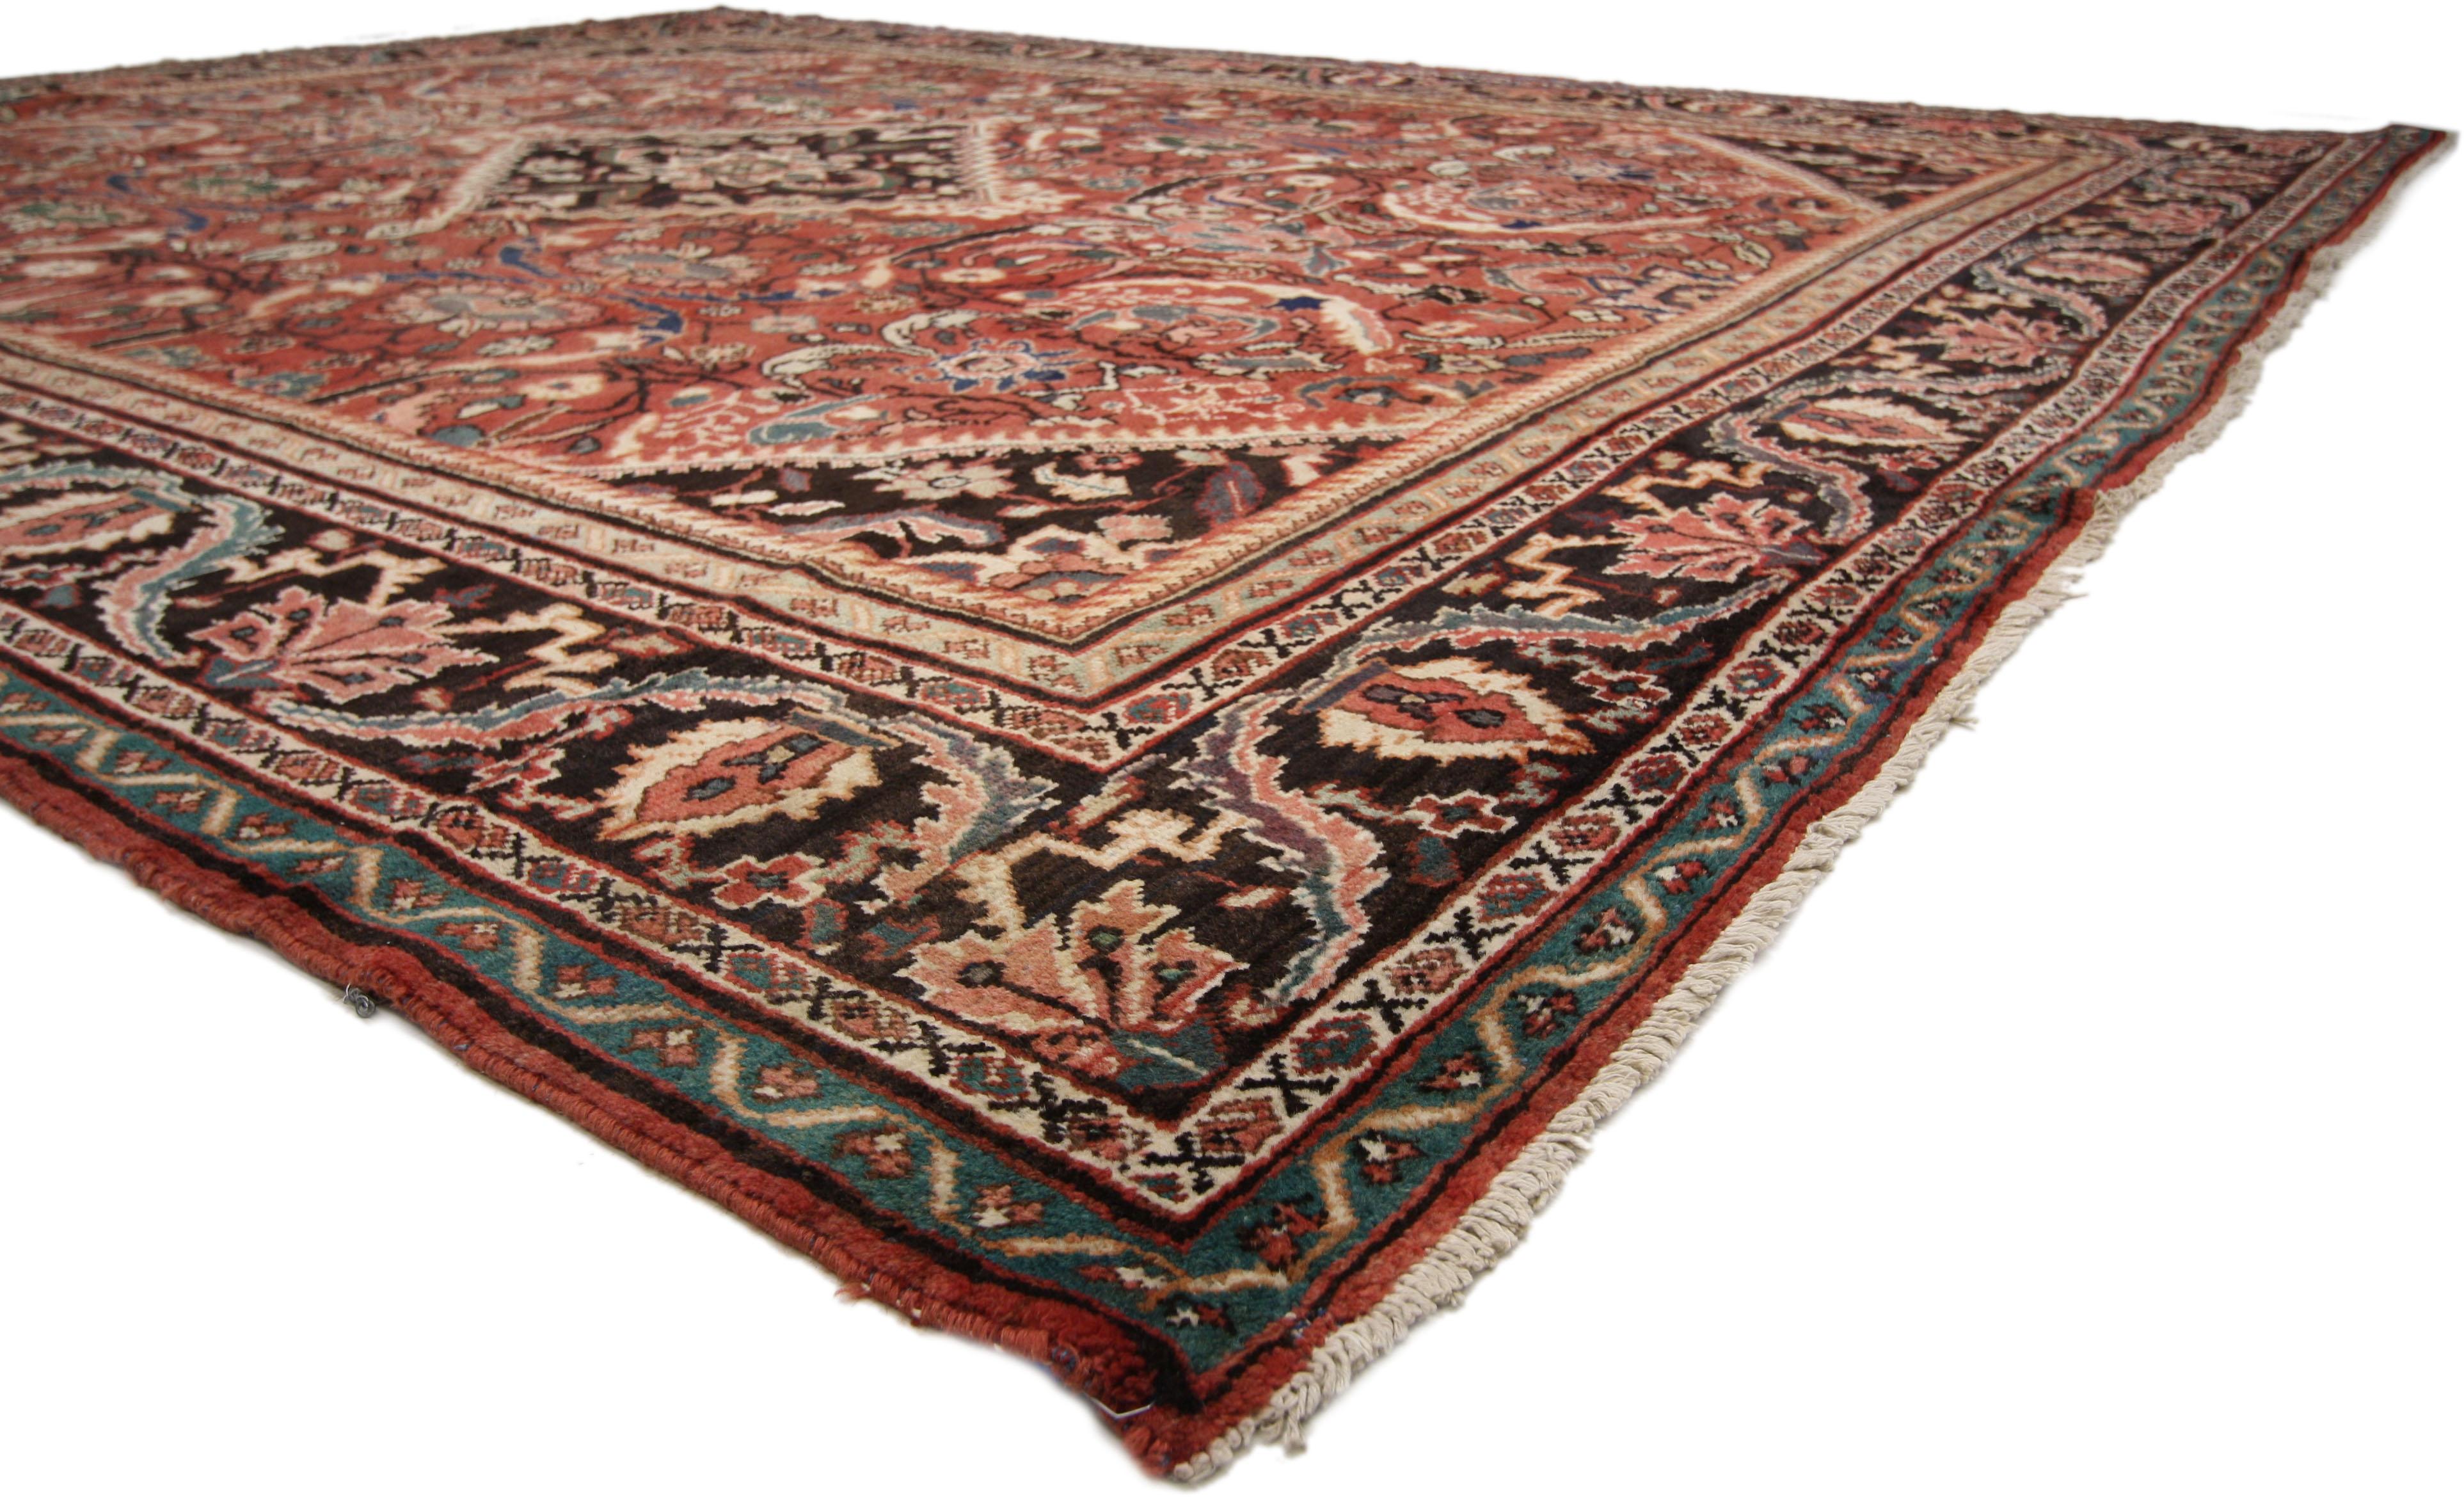 Vintage Persian Mahal Area Rug with Modern Rustic Style In Good Condition For Sale In Dallas, TX